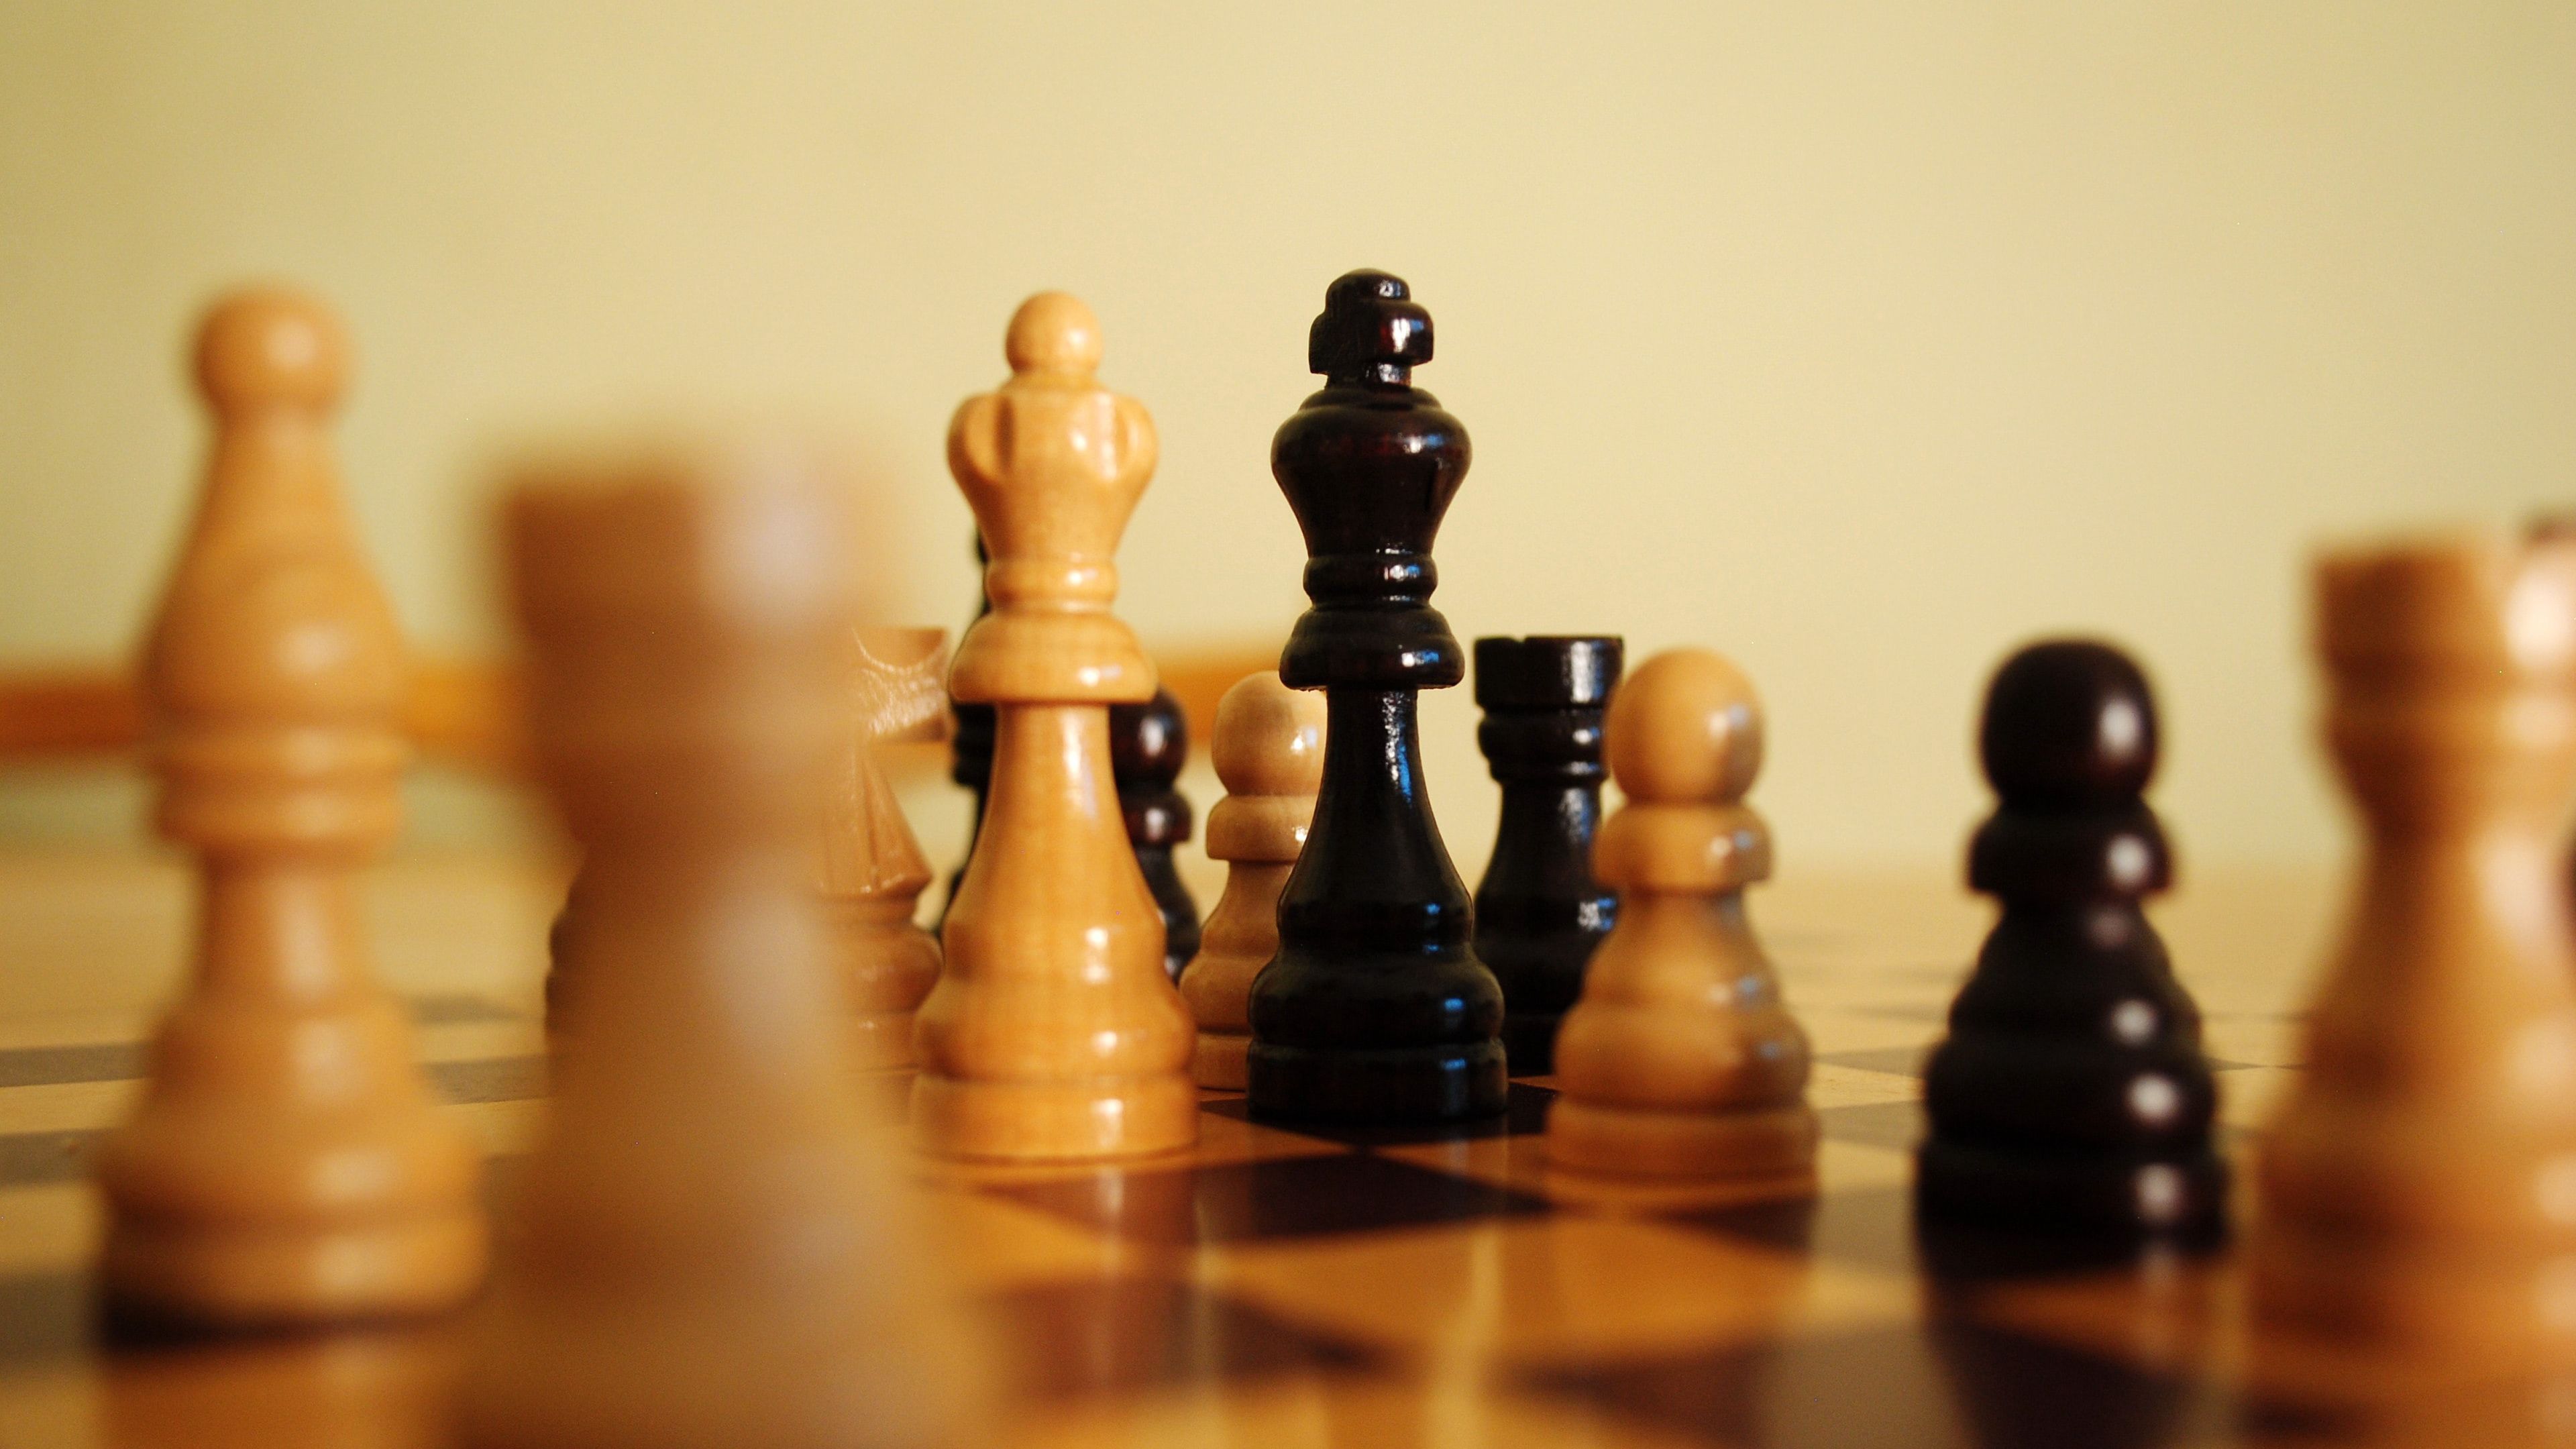 Download wallpaper 3840x2160 chess, pieces, king, queen, game, games 4k uhd 16:9 HD background